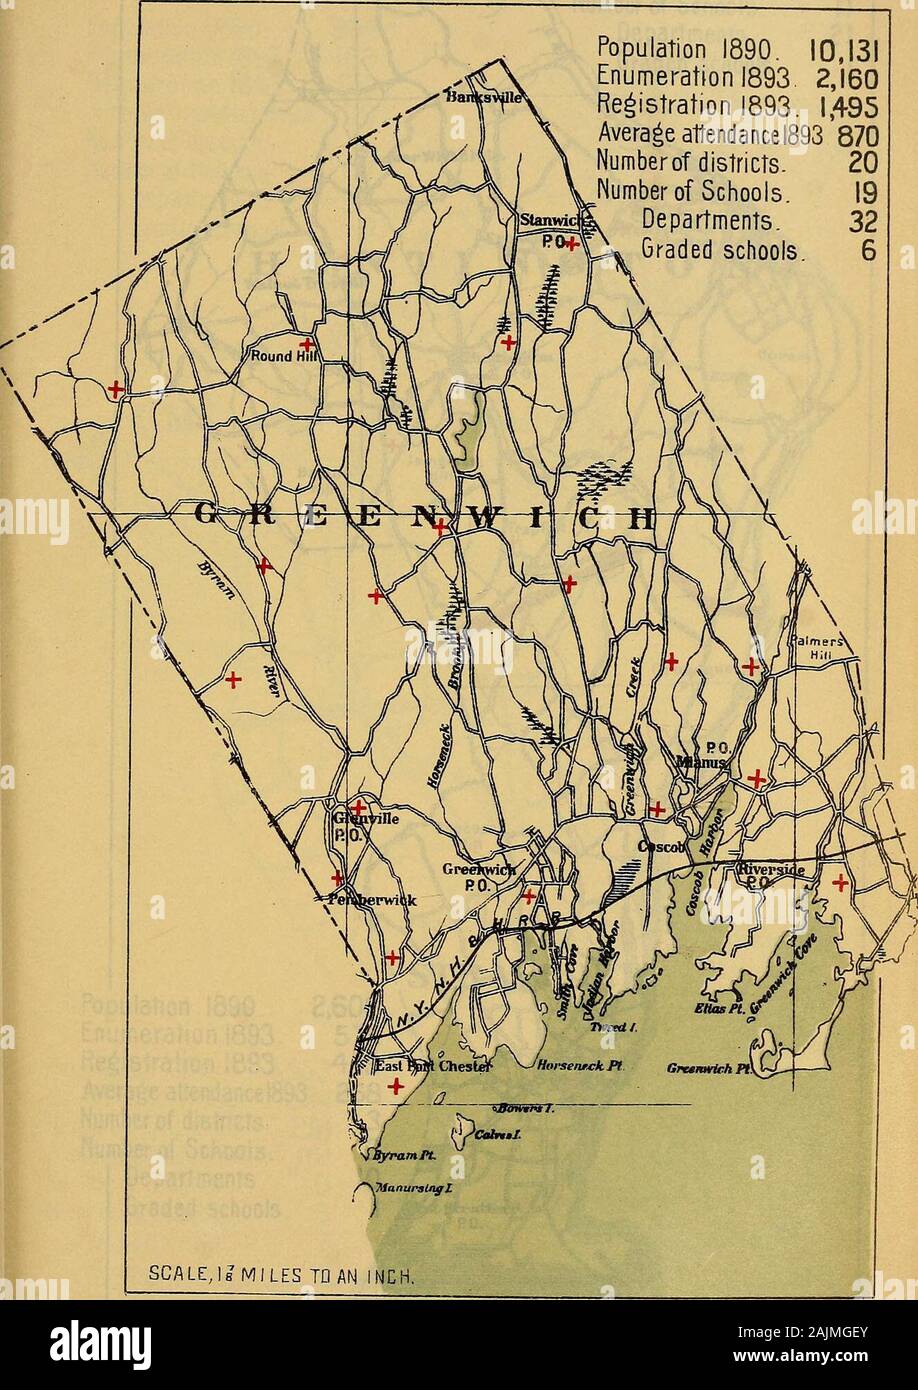 Public documents of the State of Connecticut . Population 1890. 10,131Enumeration 1893 2,160Registration 1893. 1,495Average attendance 1893 870Numberof districts. 20Number of Schools. 19«amwc§!^ Departments. 32Graded schools. 6. FROM MAP OF CONN.C0PYRI6HT 1893. BY GEO.H.WALKER SCO.BOSTOK. Population 1890. 4,006Enumeration 1893. 1,003Registration 1893. 897Average attendance 1893.593Number of districts.Number of Schools. Departments. Graded schools. Stock Photo